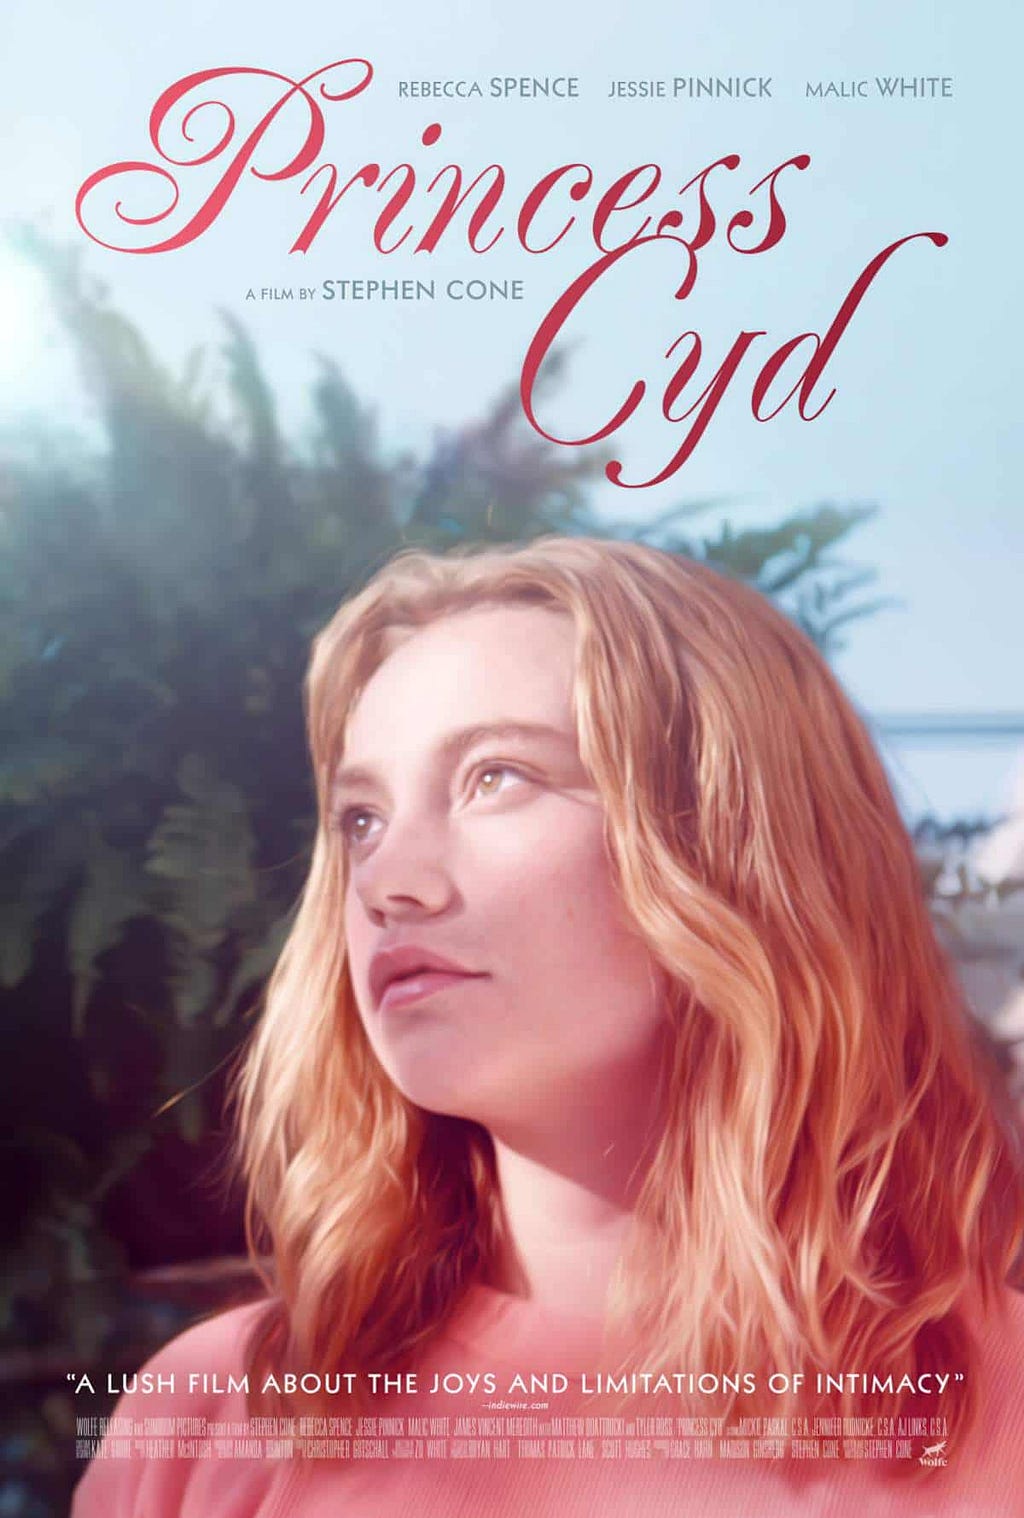 Film poster for Princess Cyd. The main character looks into the distance. She is in her late teens, white, blonde.